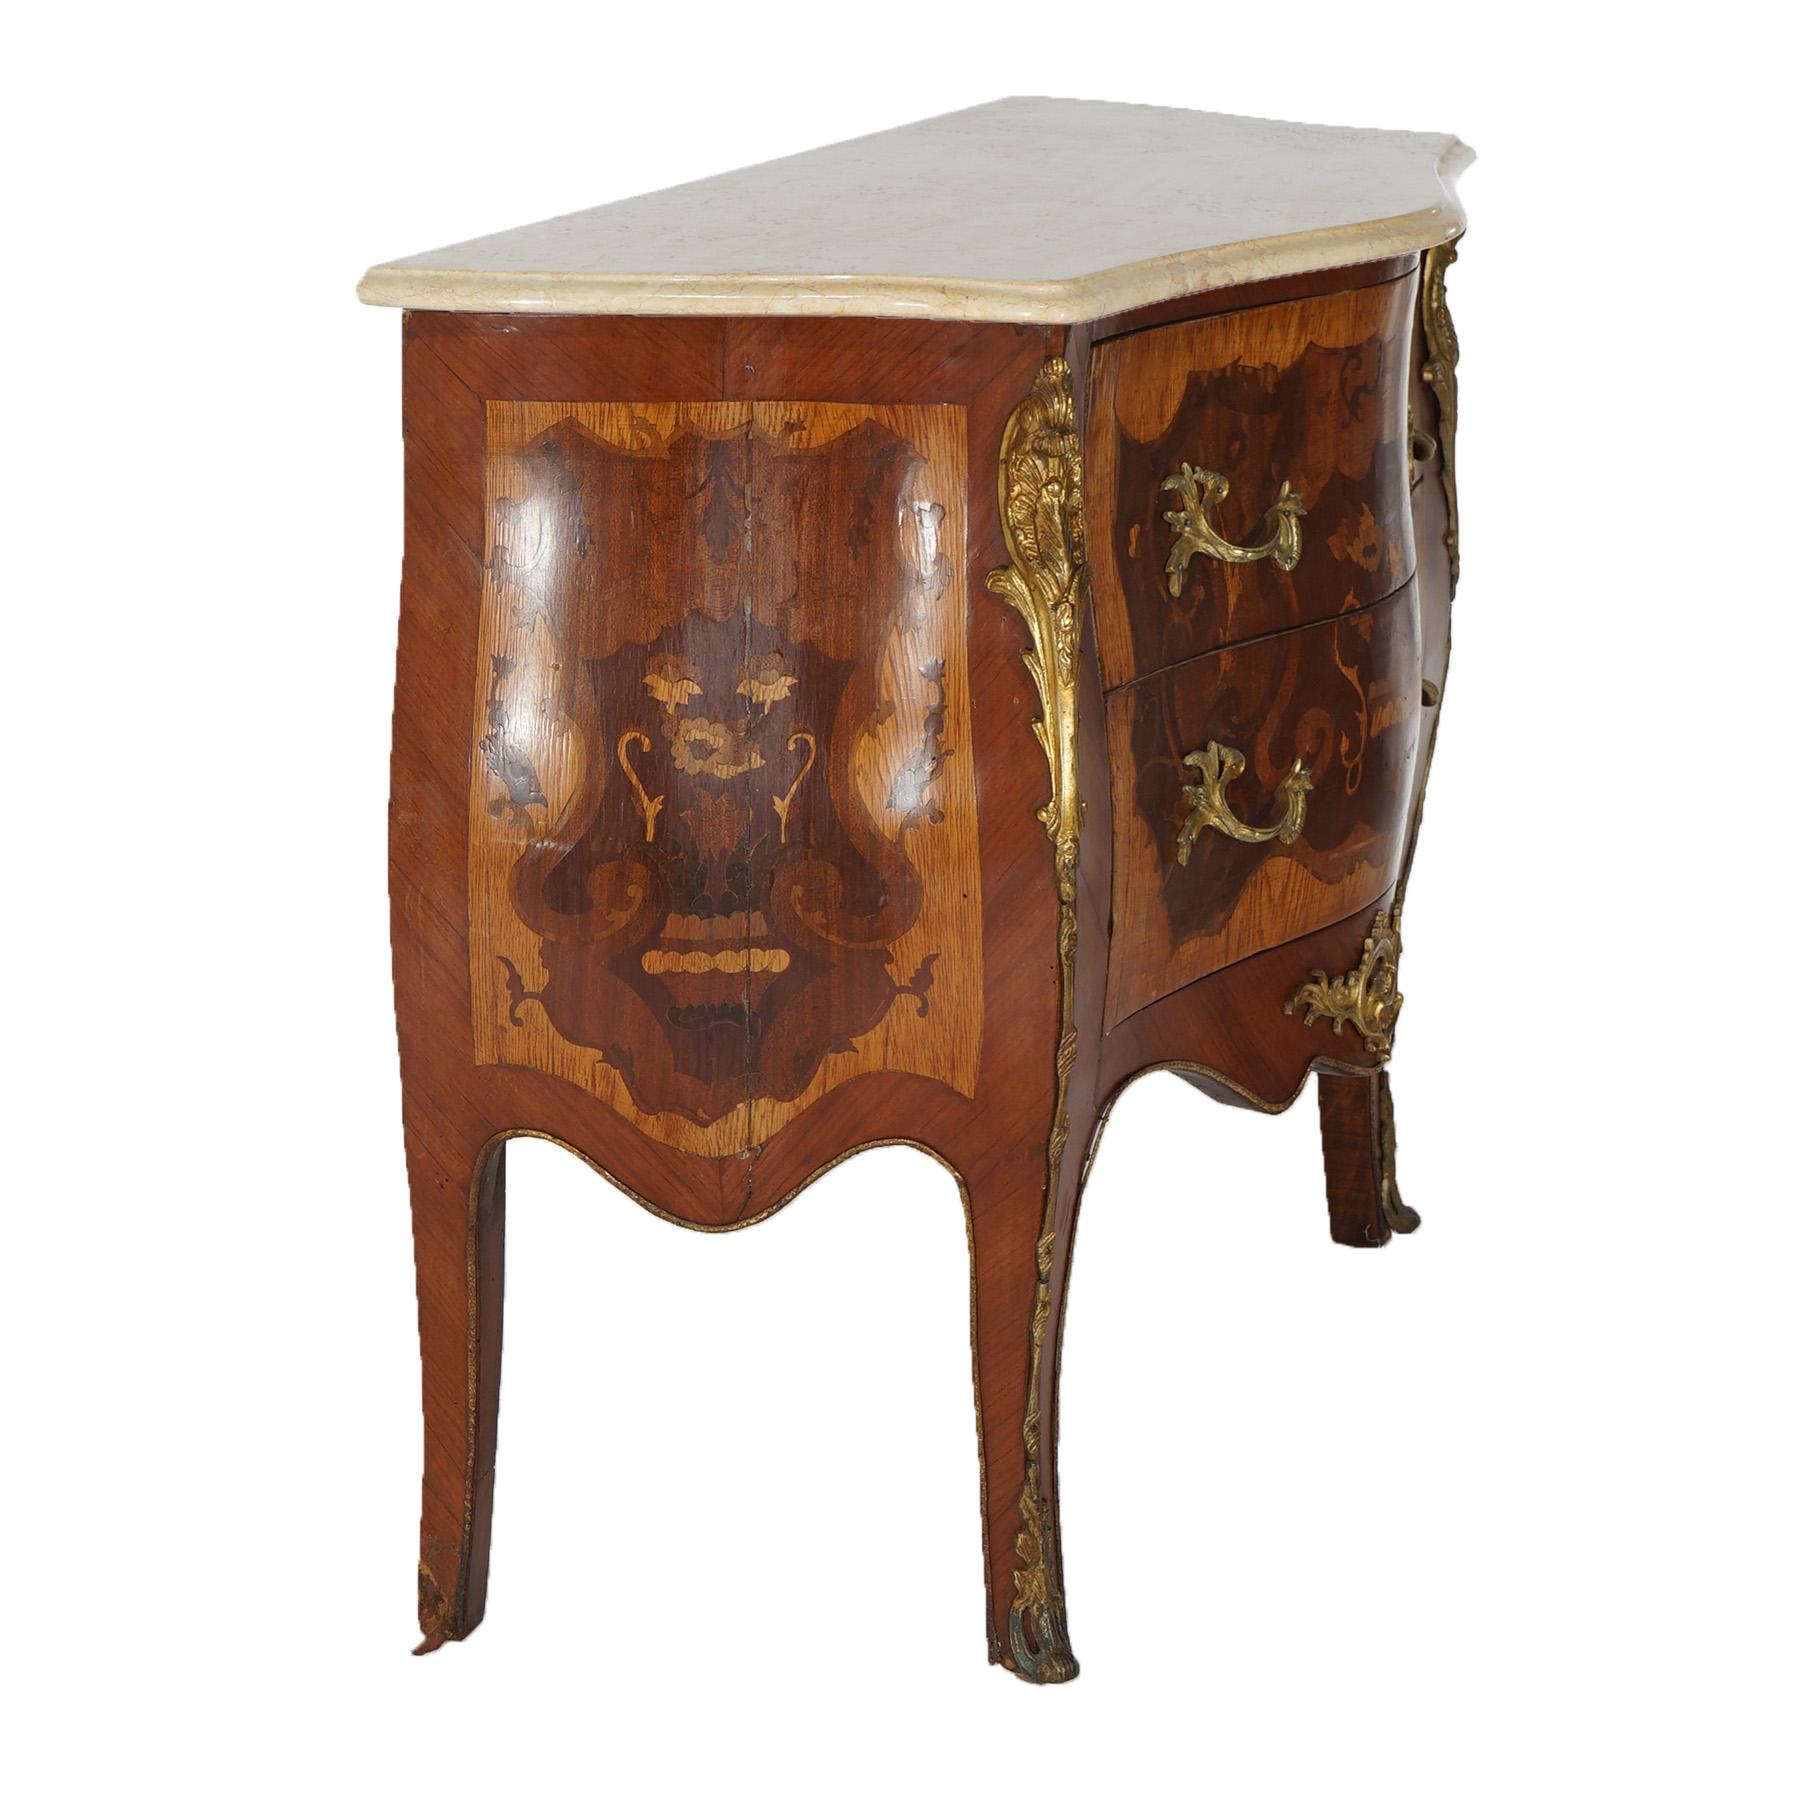 Antique Louis XV Style Marble, Ormolu, Satinwood & Kingwood Inlaid Commode 20thC For Sale 4